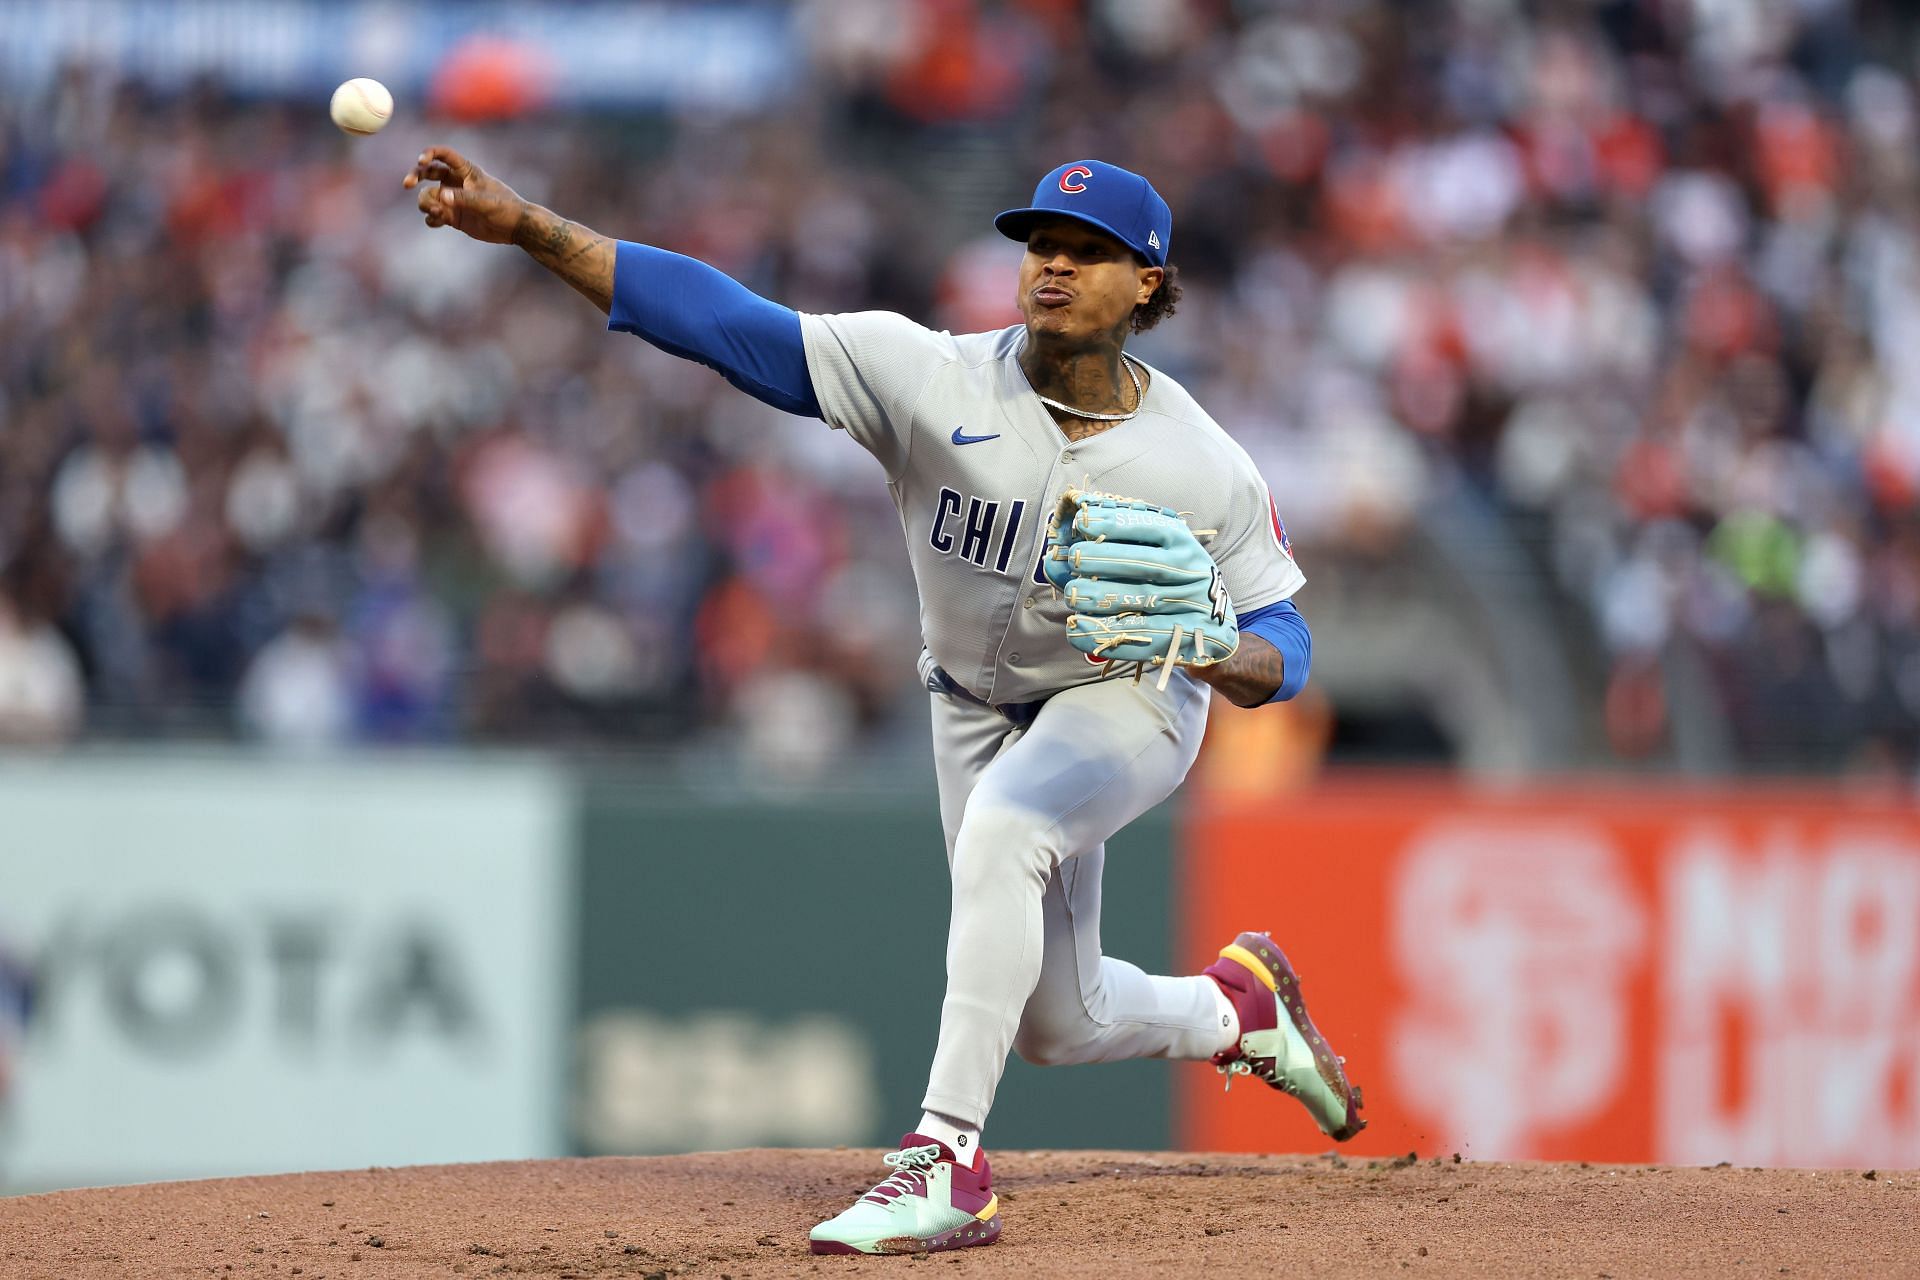 Cubs' Marcus Stroman optimistic after exiting last start with blister